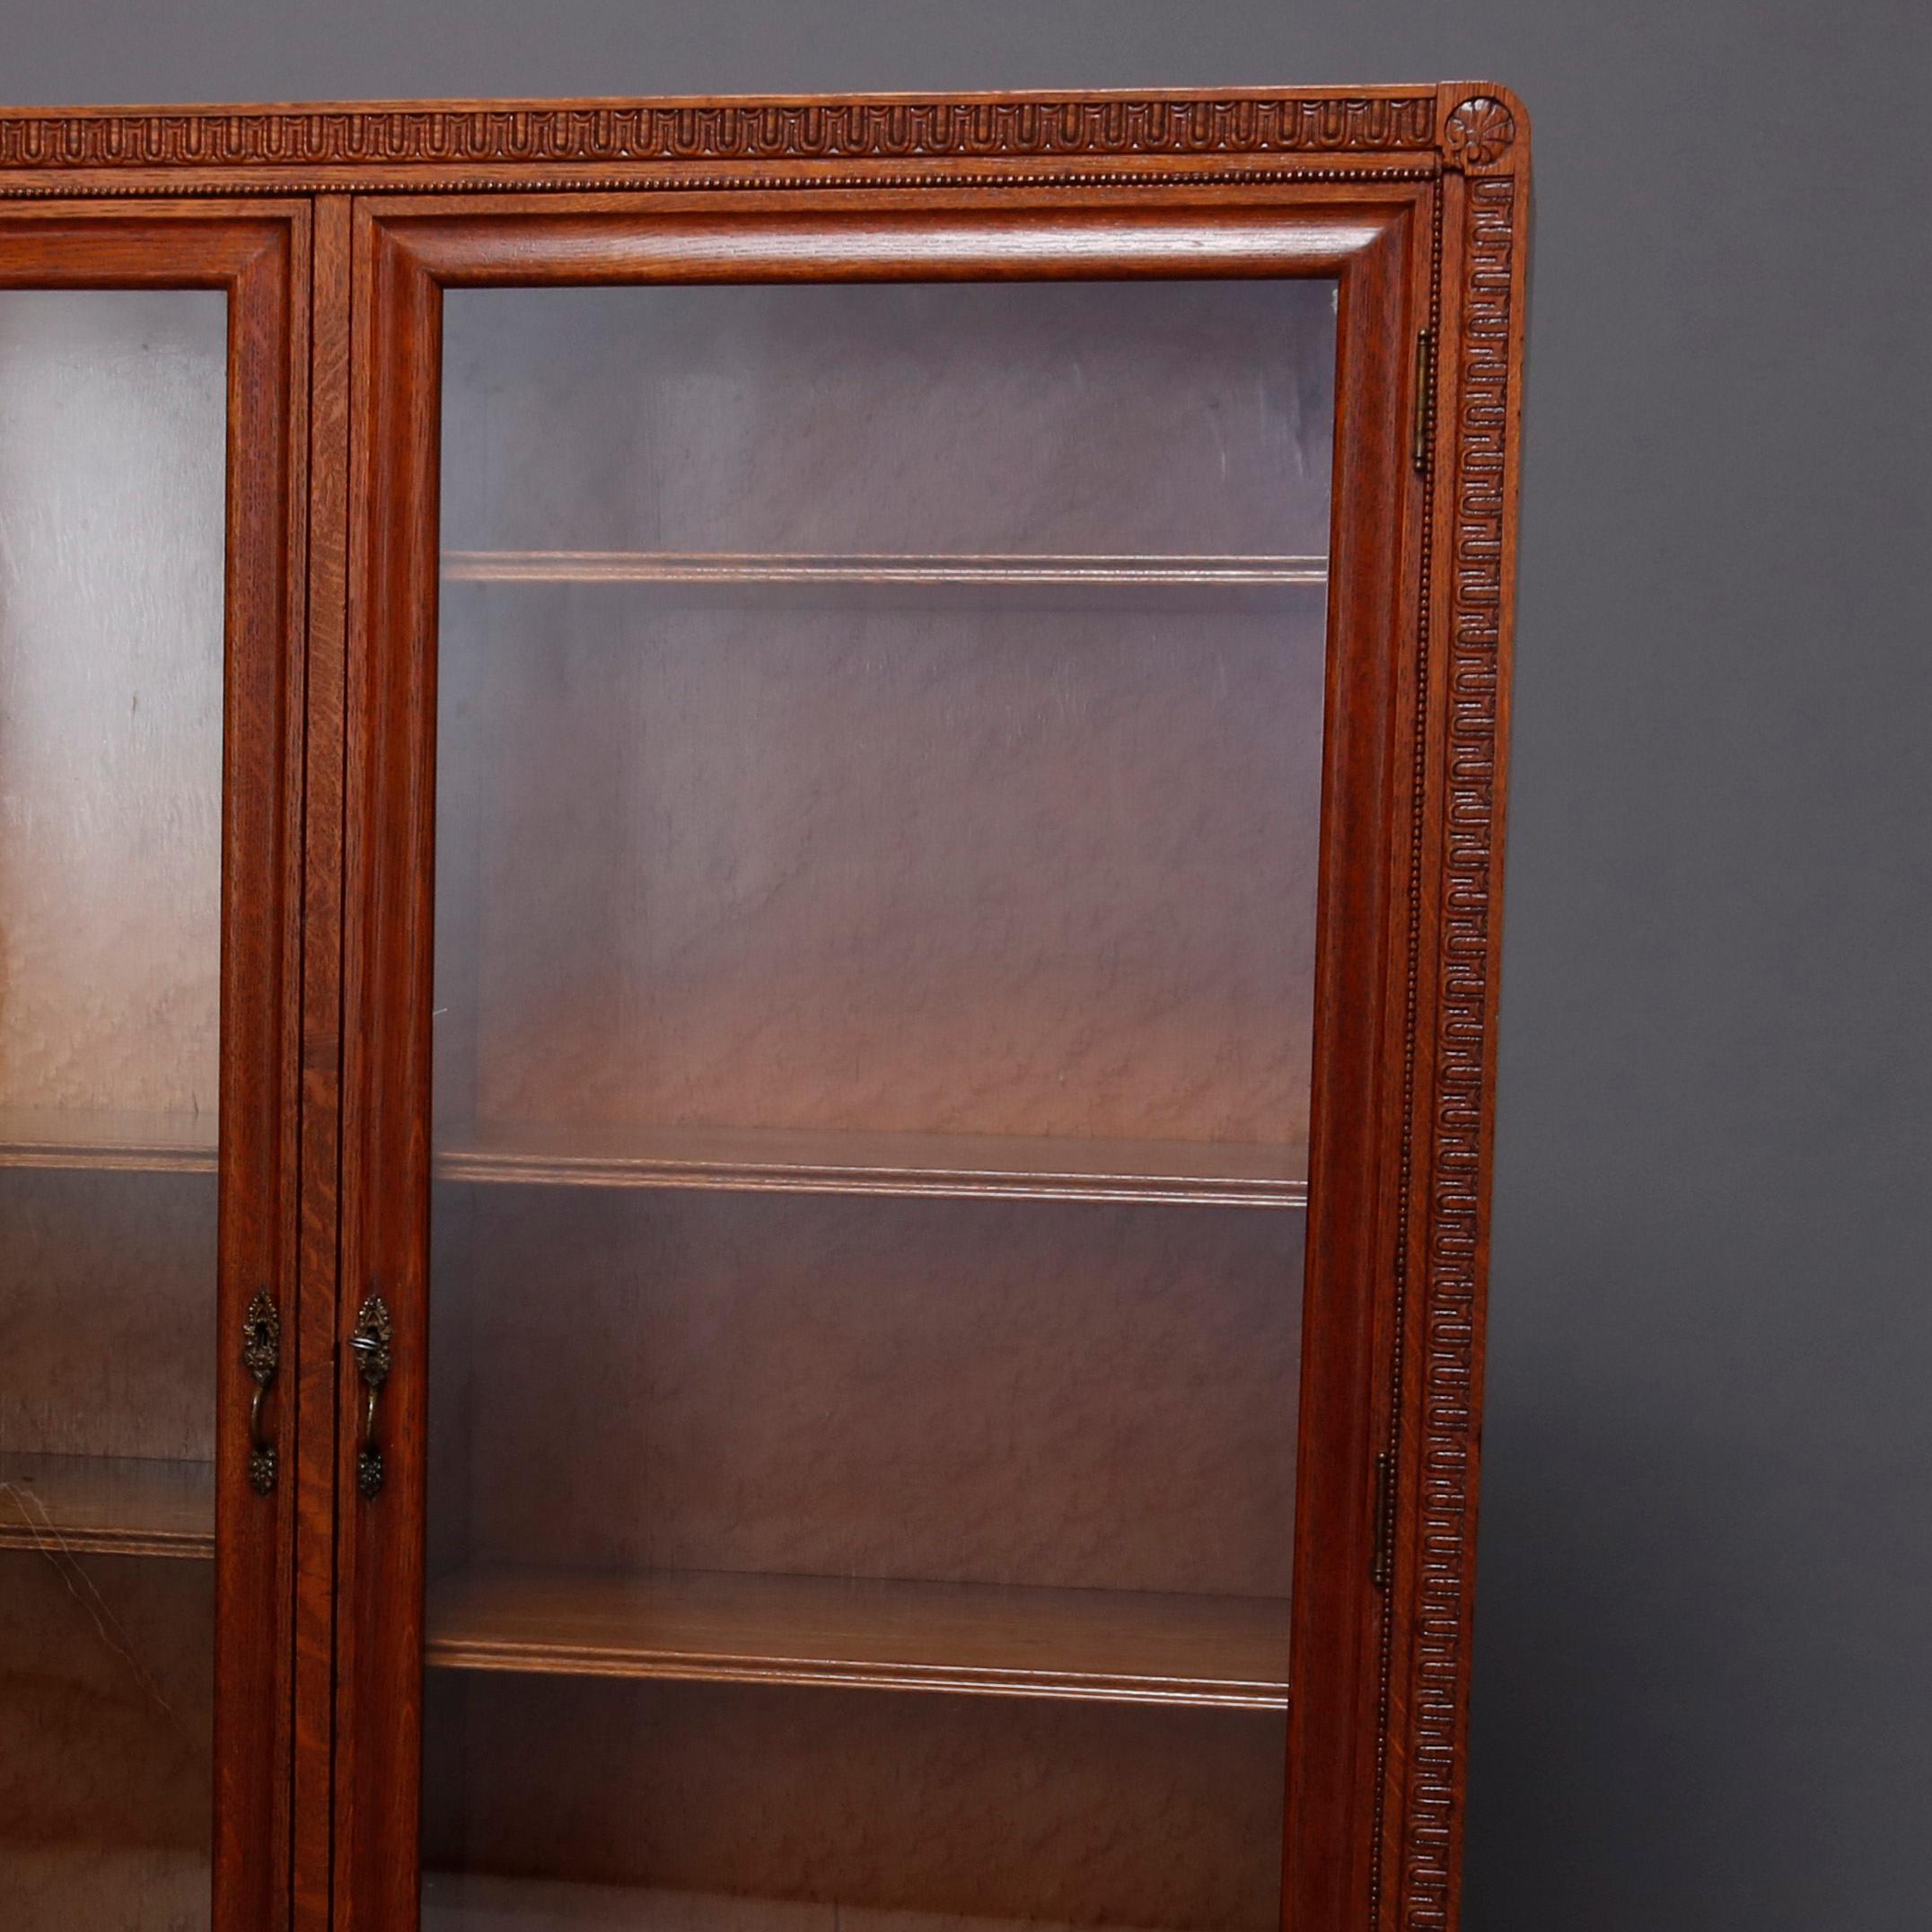 antique bookcases with glass doors